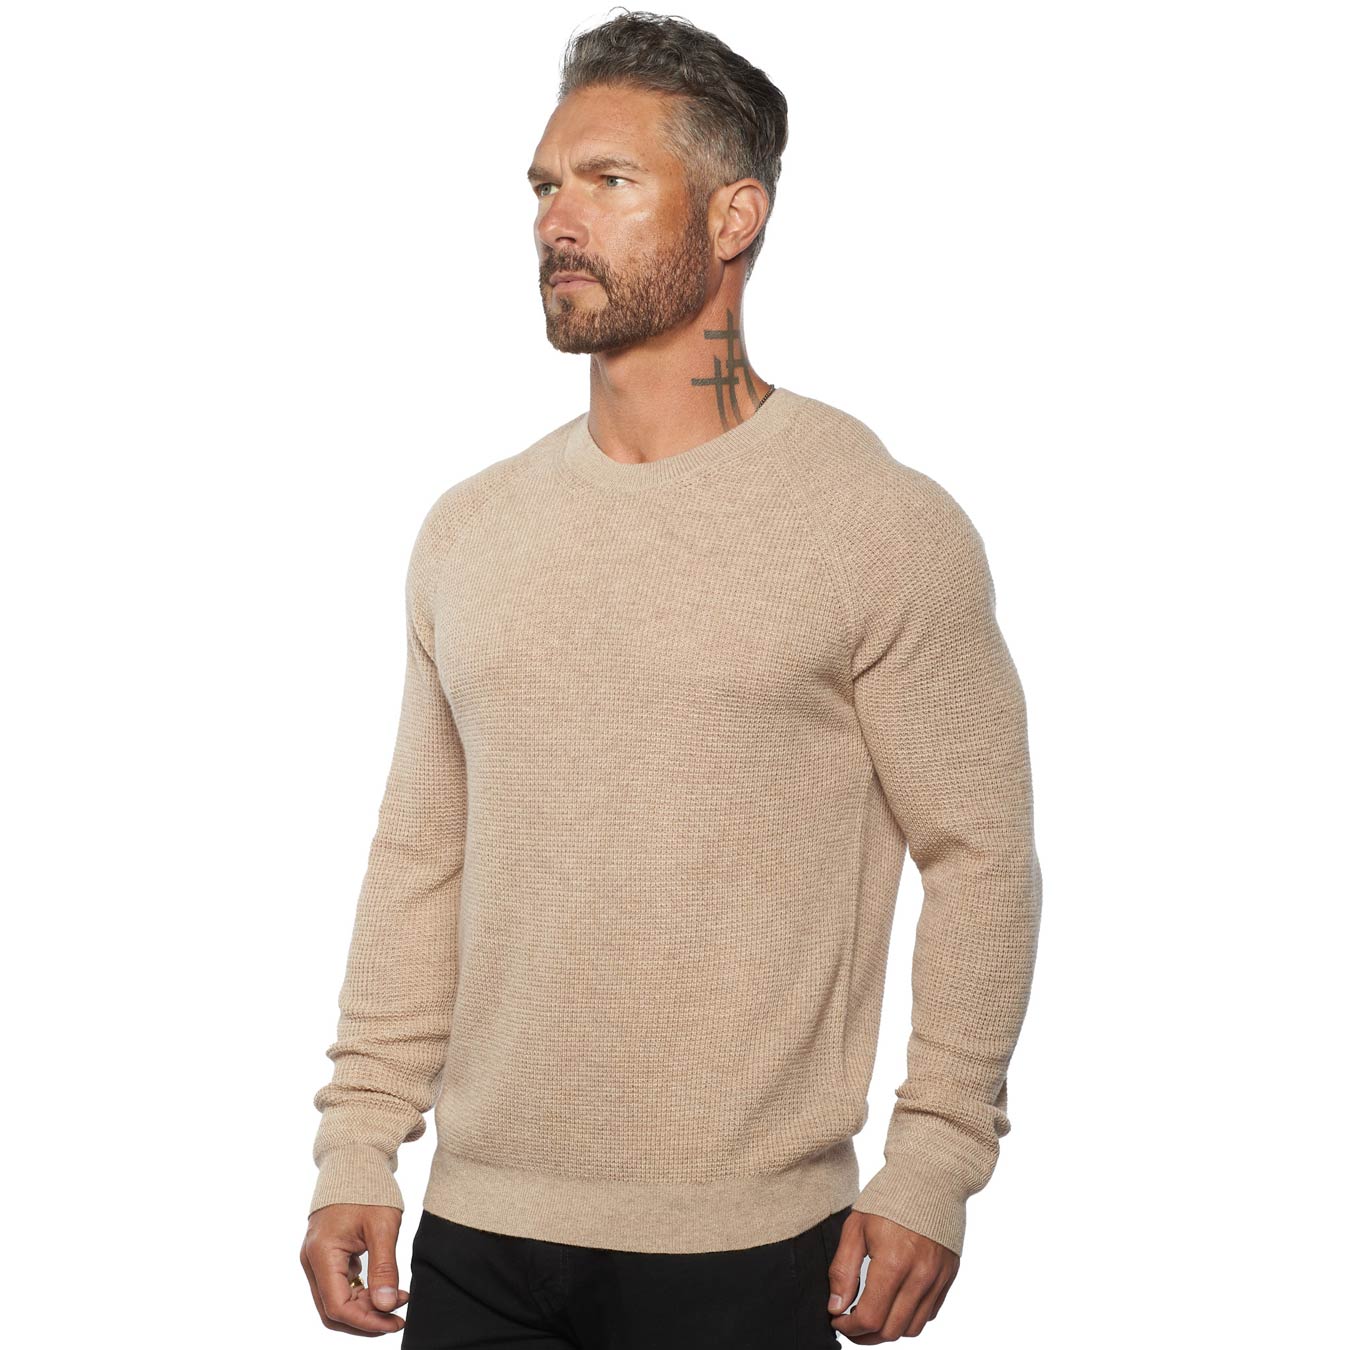 The Valen Waffle Knit Cashmere & Wool Men's Sweater